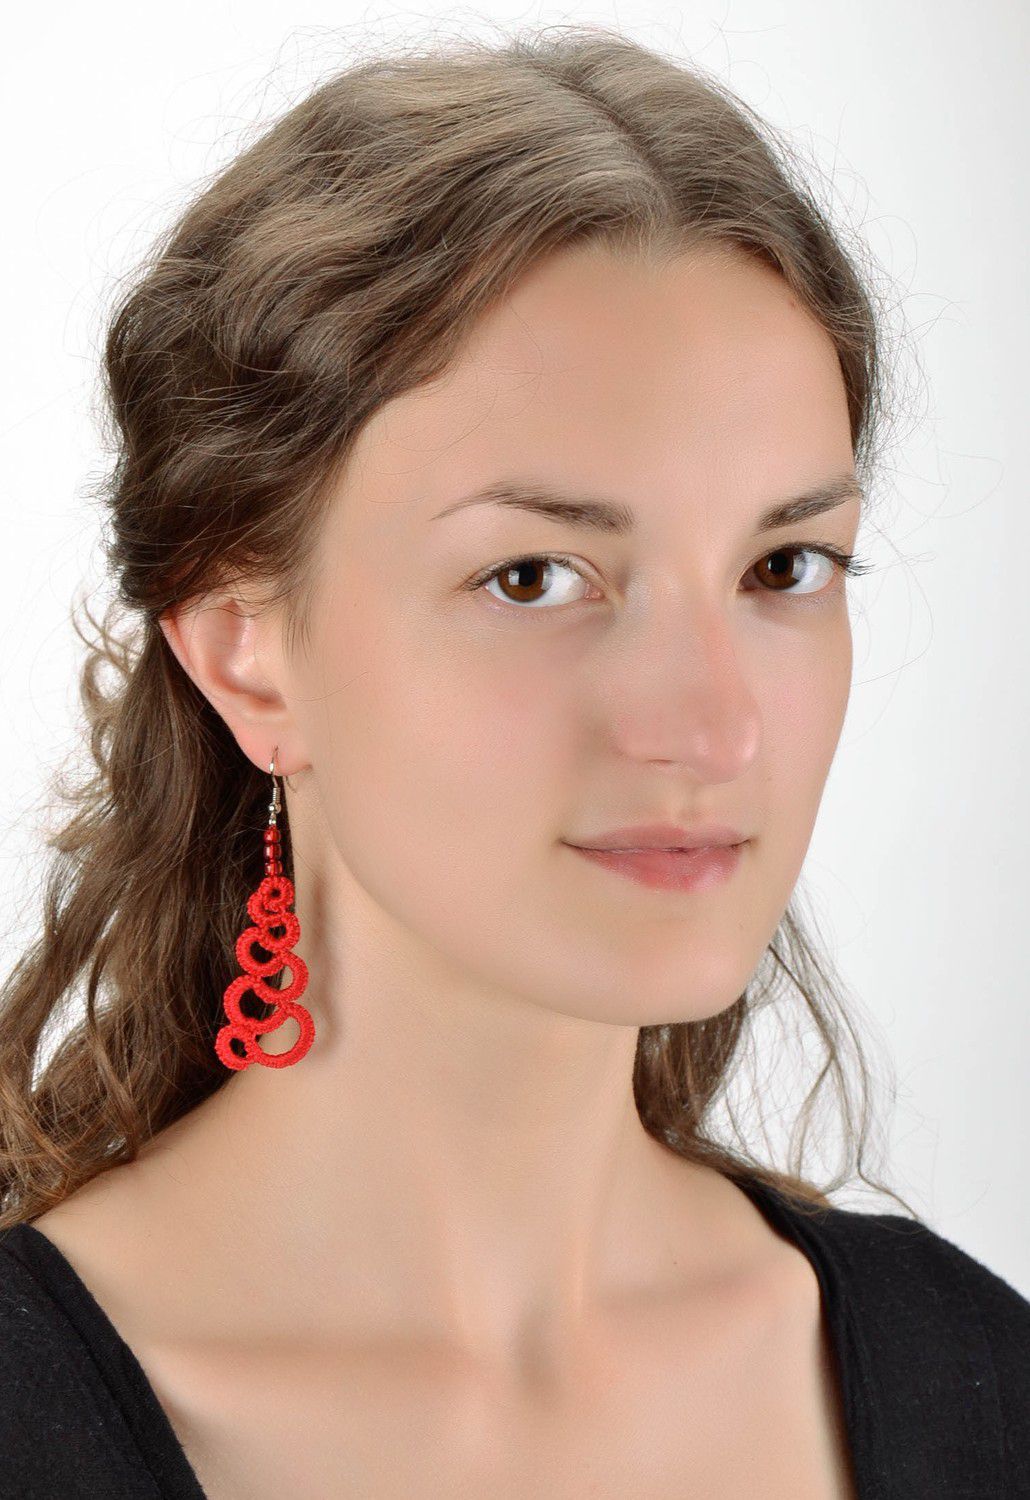 Scarlet earrings made from woven lace photo 5